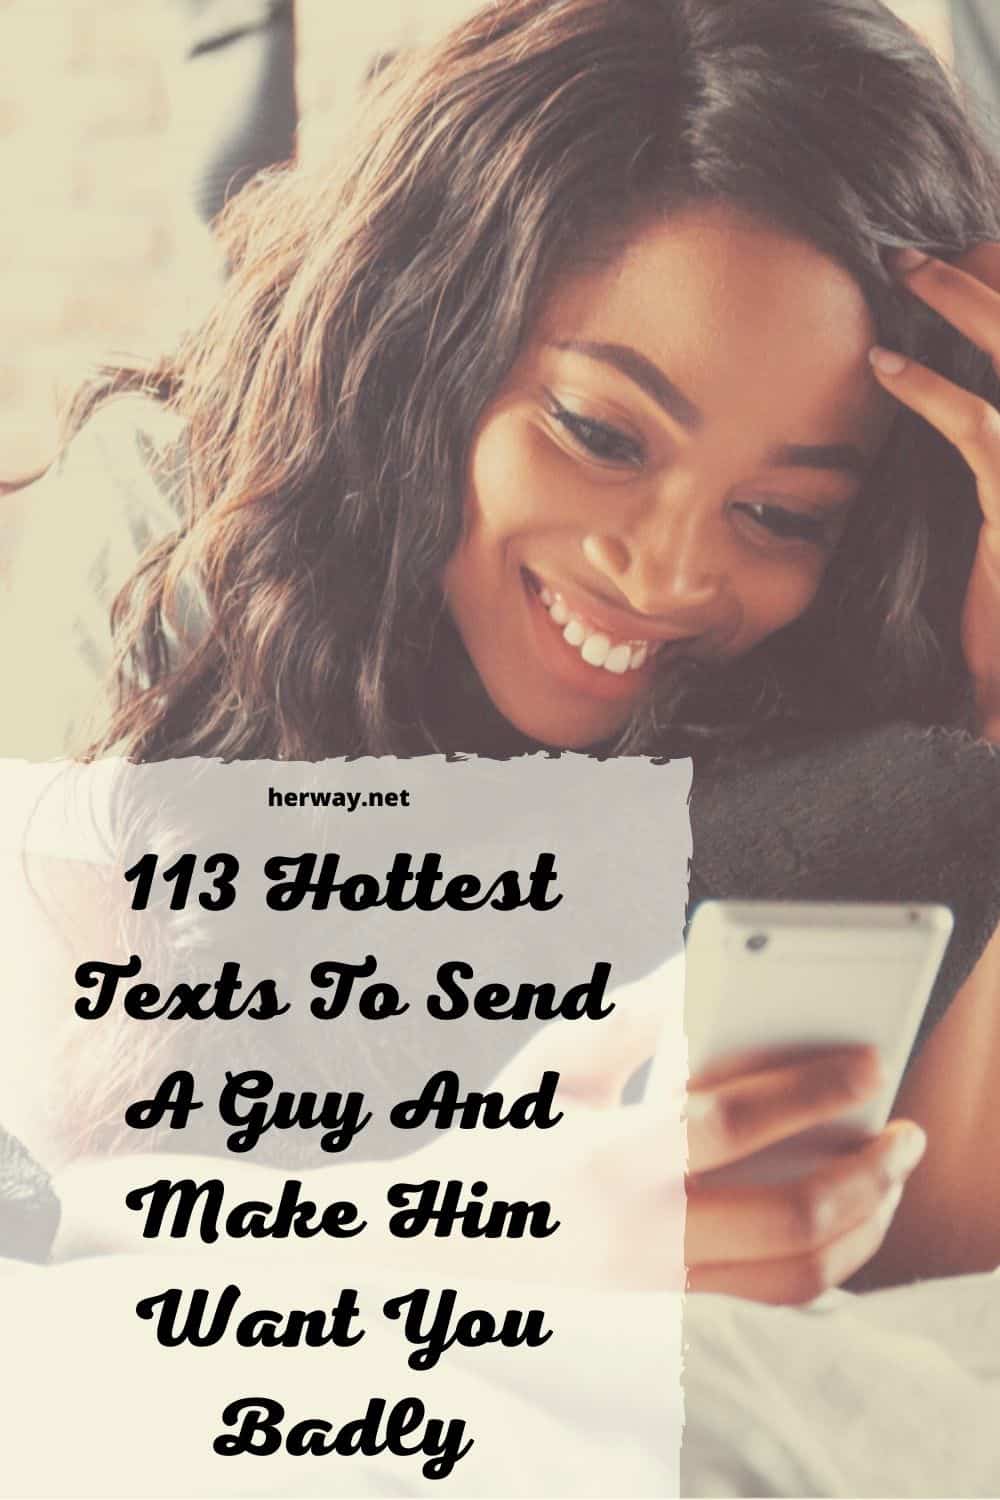 What to text him to make him want you